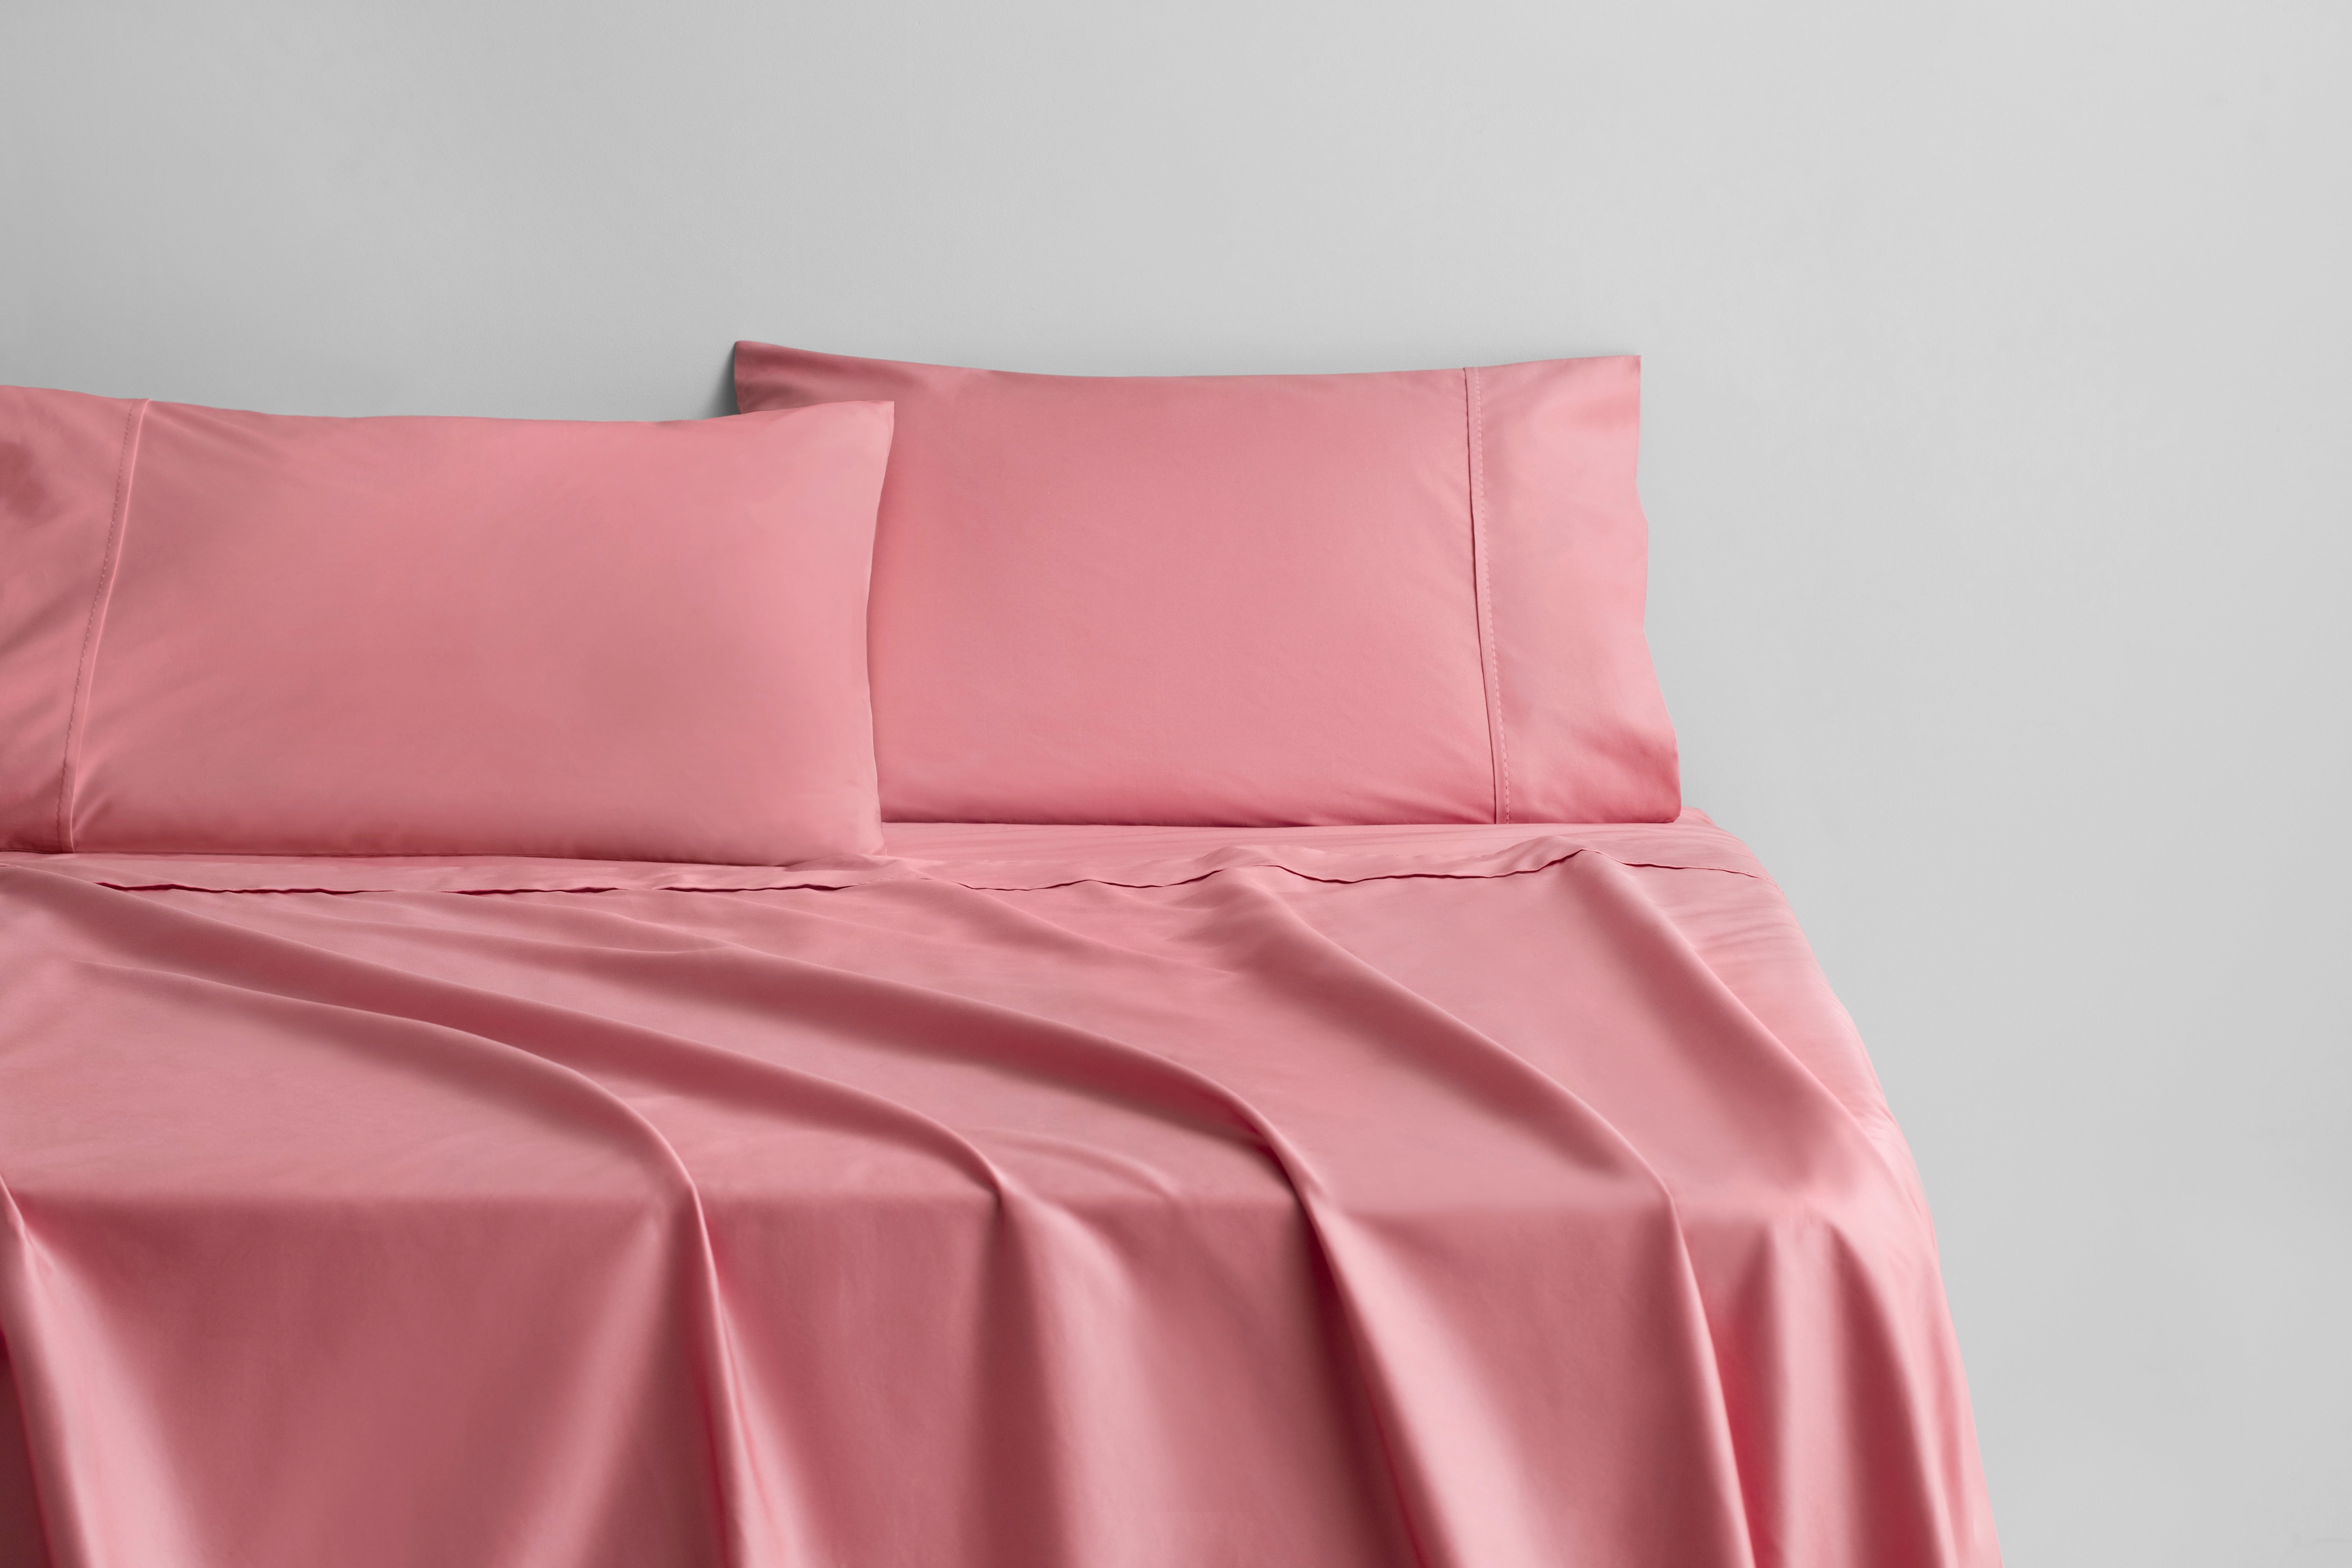 Bed Linen Collection Pink 1000TC Organic Cotton Choose US Size & Item 